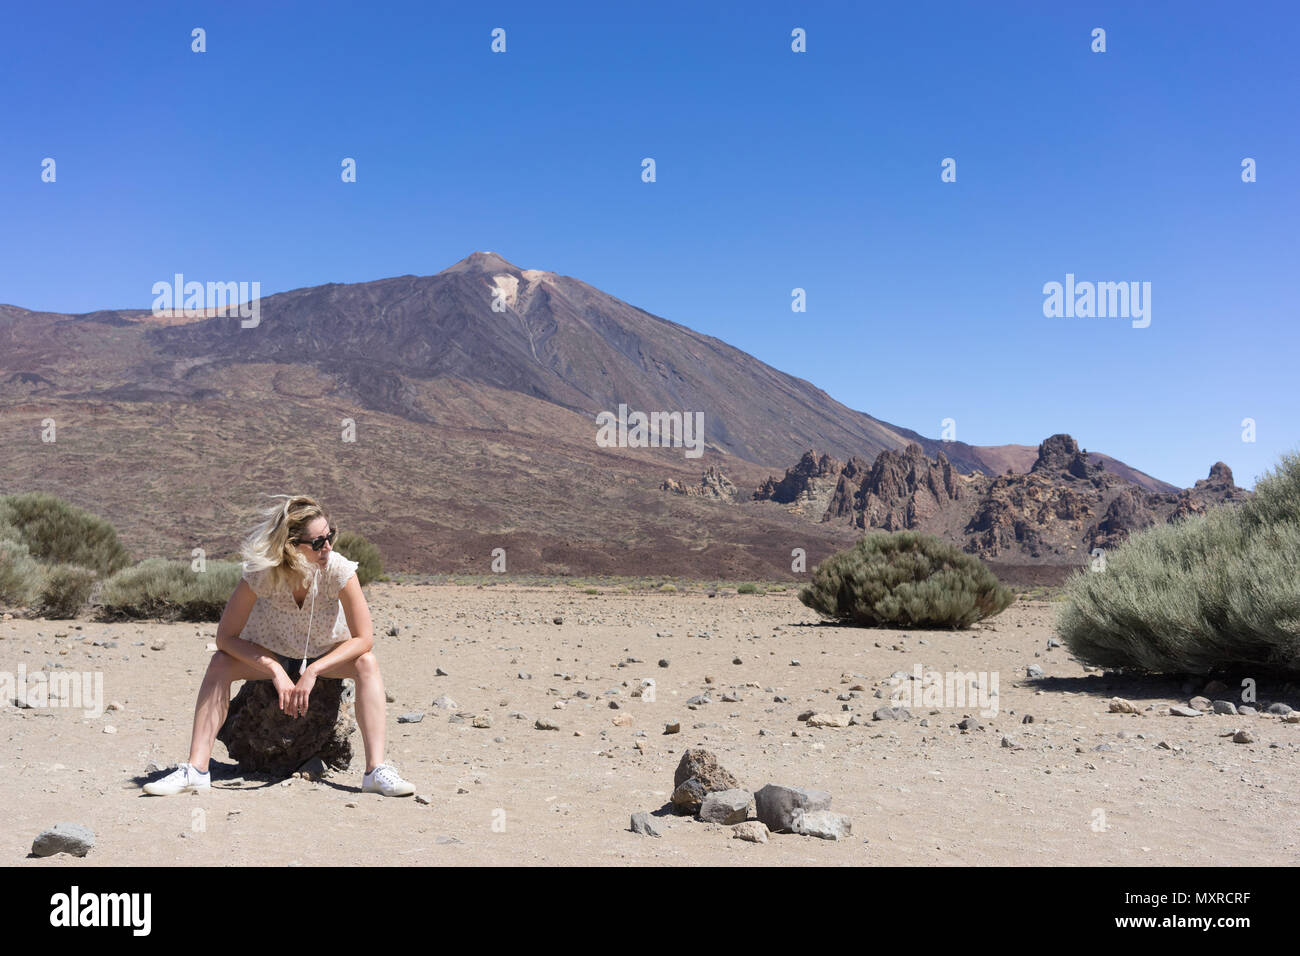 Woman siting on a rock with a volcano in the background Stock Photo